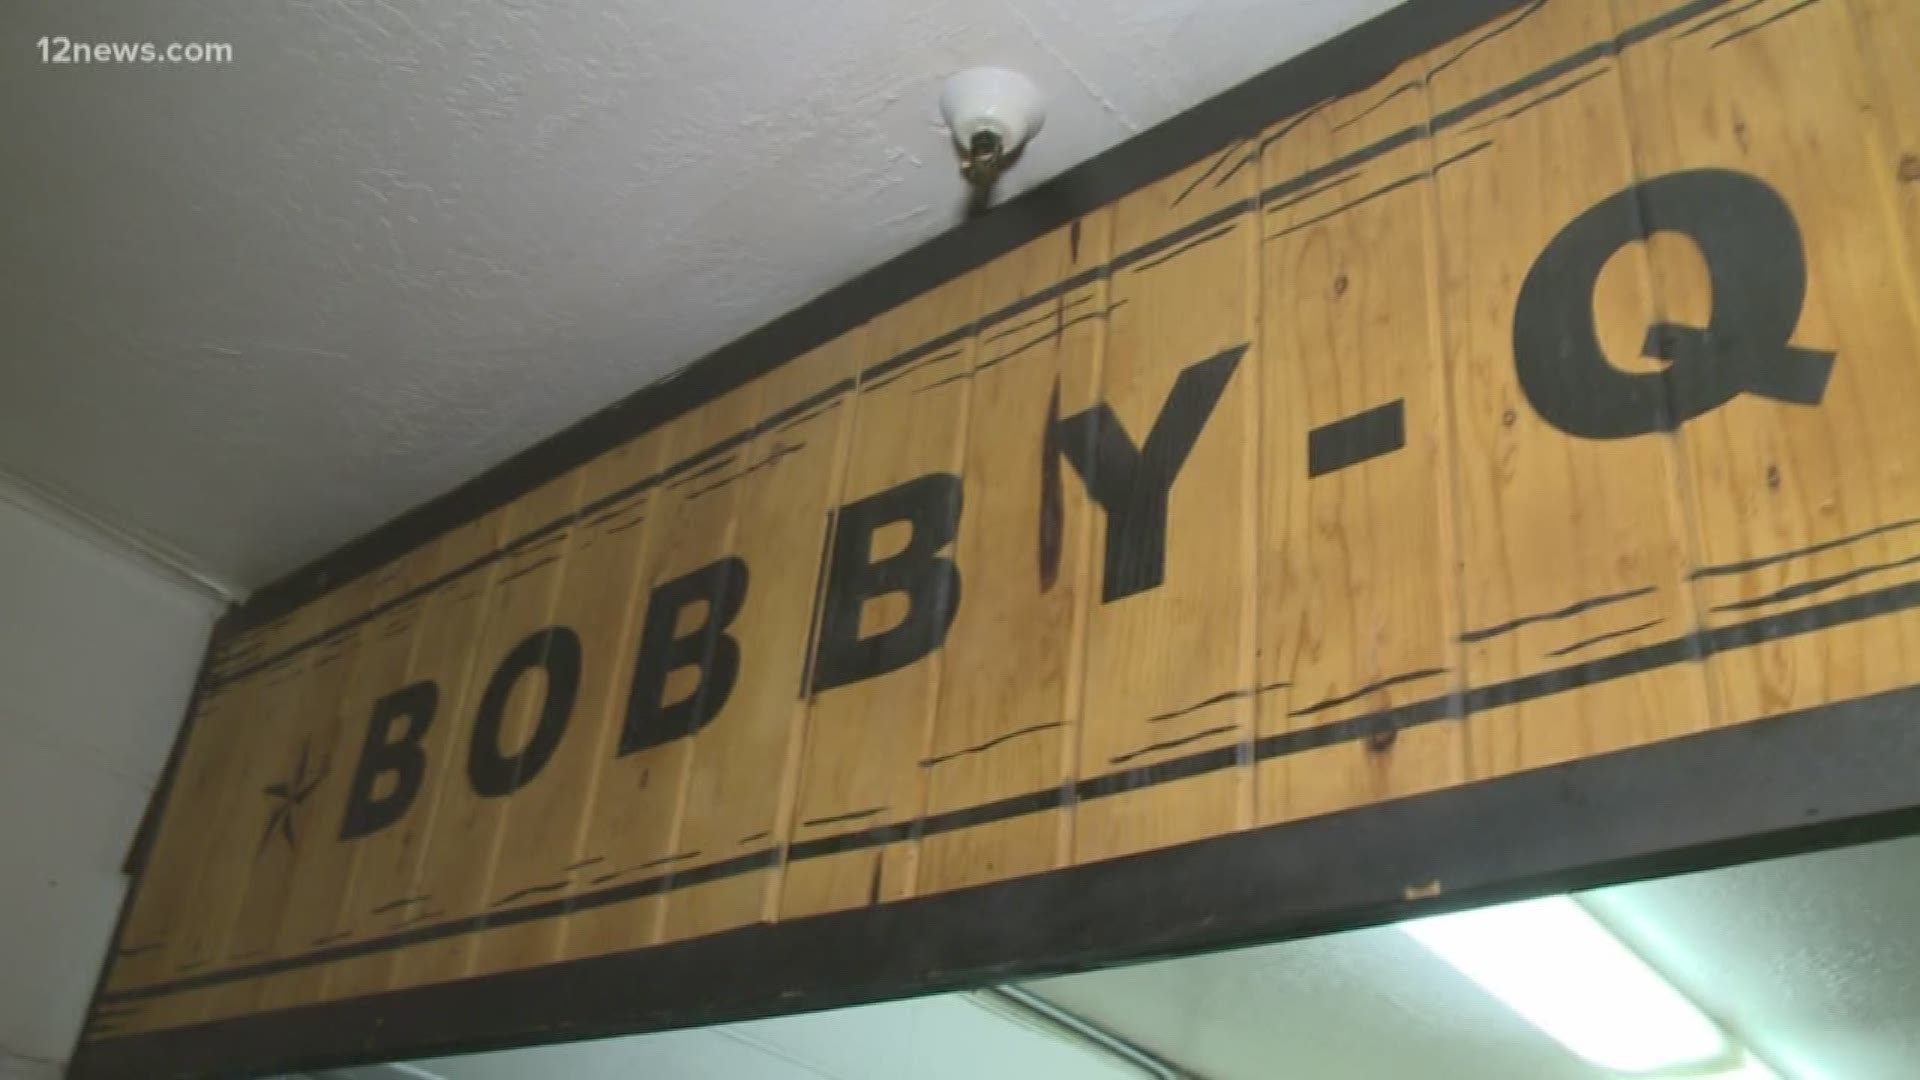 12 News' Jimmy Q took a trip to Bobby-Q in Phoenix for some deliciously famous barbecue.